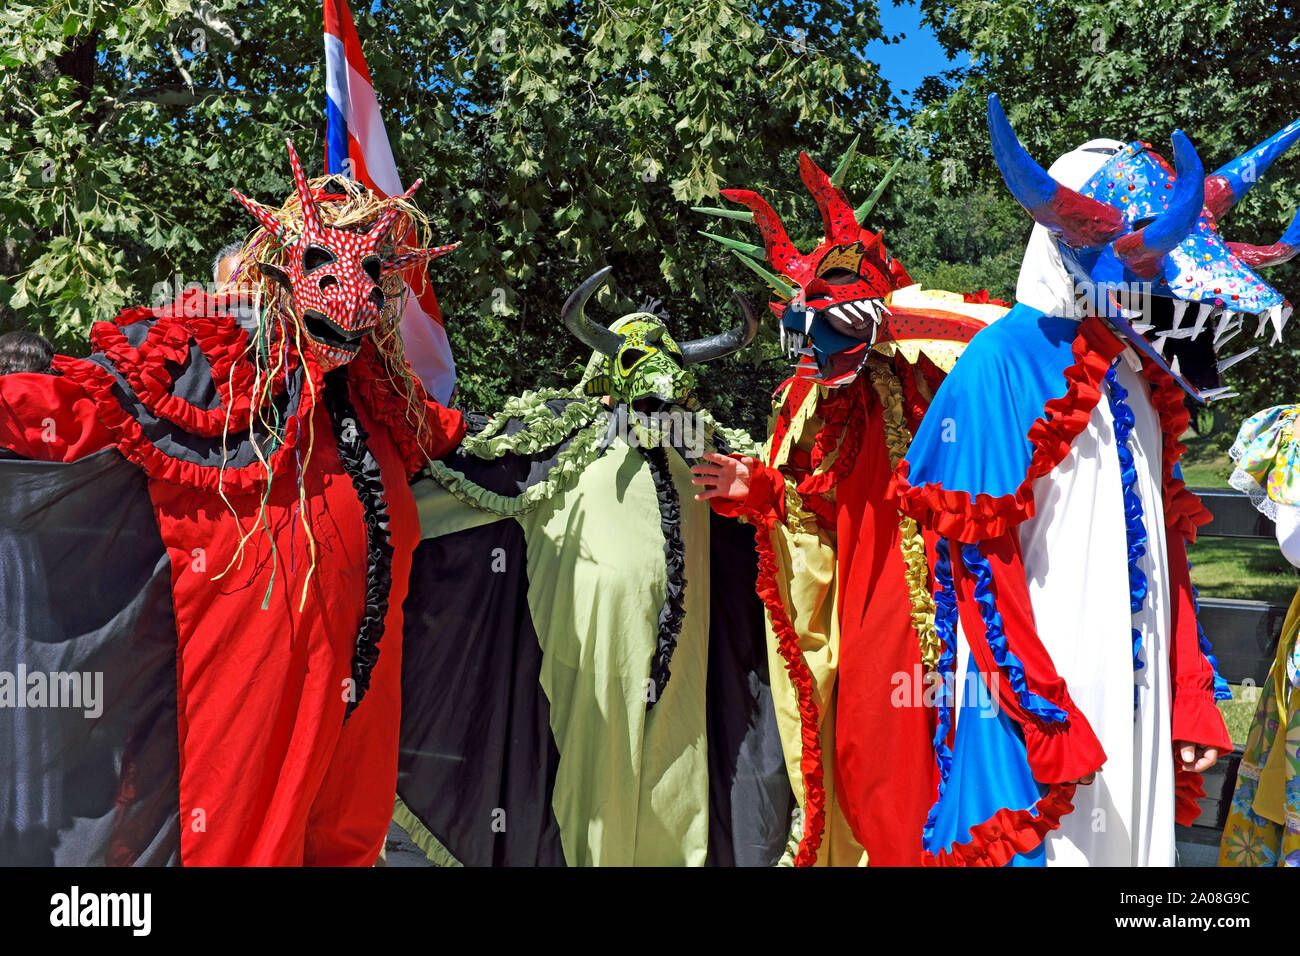 Chupacabra-dressed participants in the One World Day celebration in Cleveland, Ohio are part of the group representing the Puerto Rican community. Stock Photo